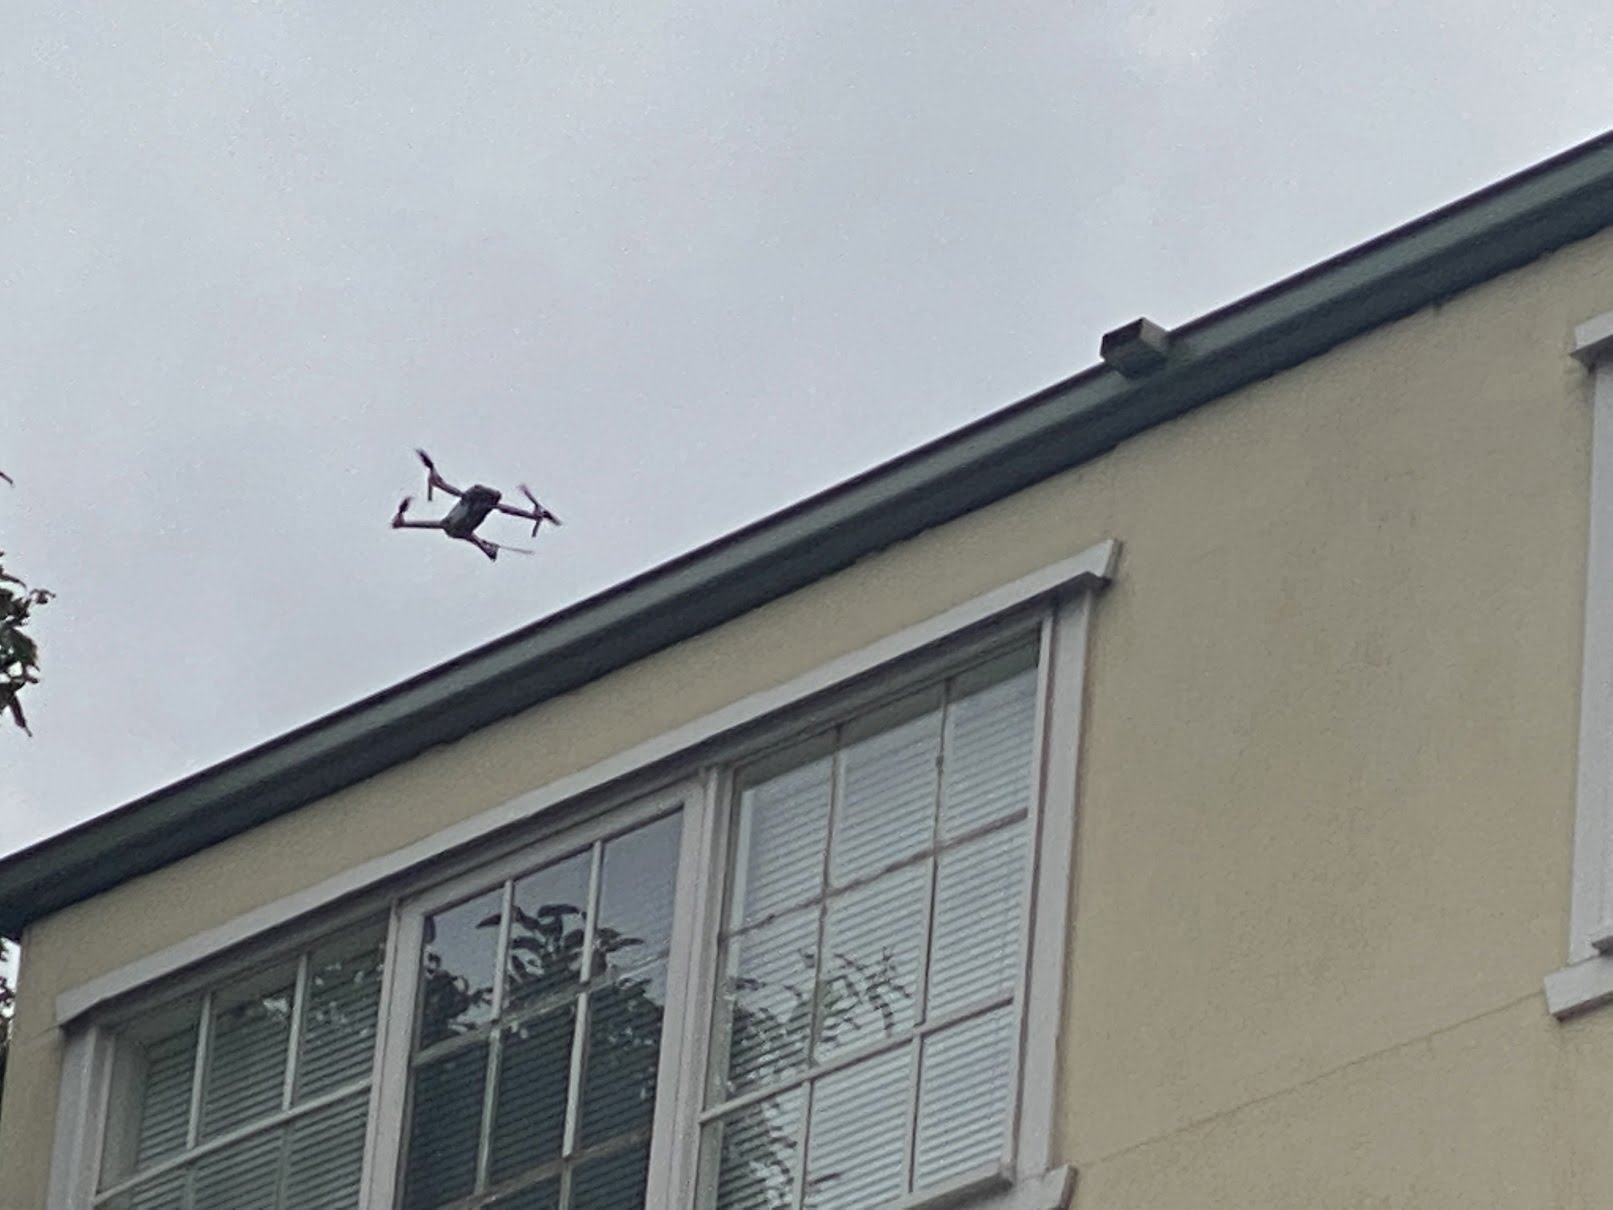 Roof inspection with a drone